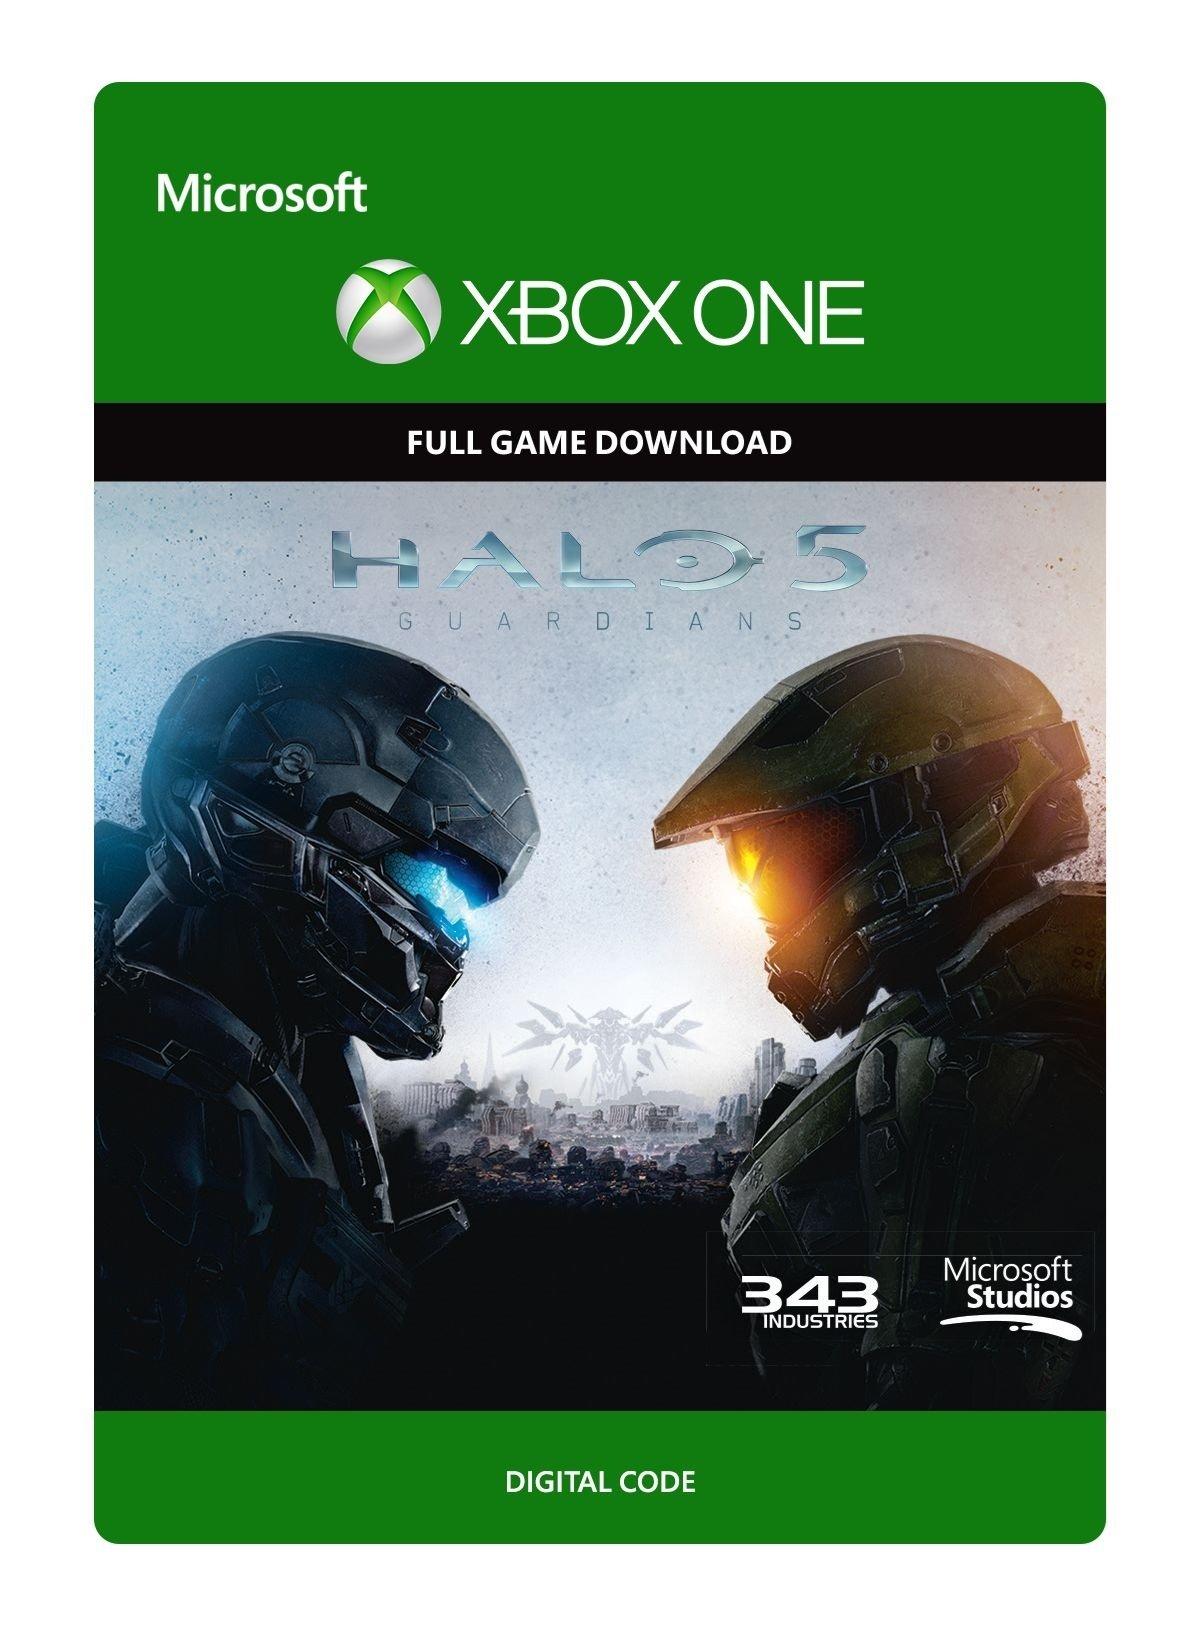 Halo 5 Guardians: Standard Edition Xbox One Full Game (Digitale Code) | G3Q-00035 (825c786d-1c21-4286-8007-5a792a44ce5e)